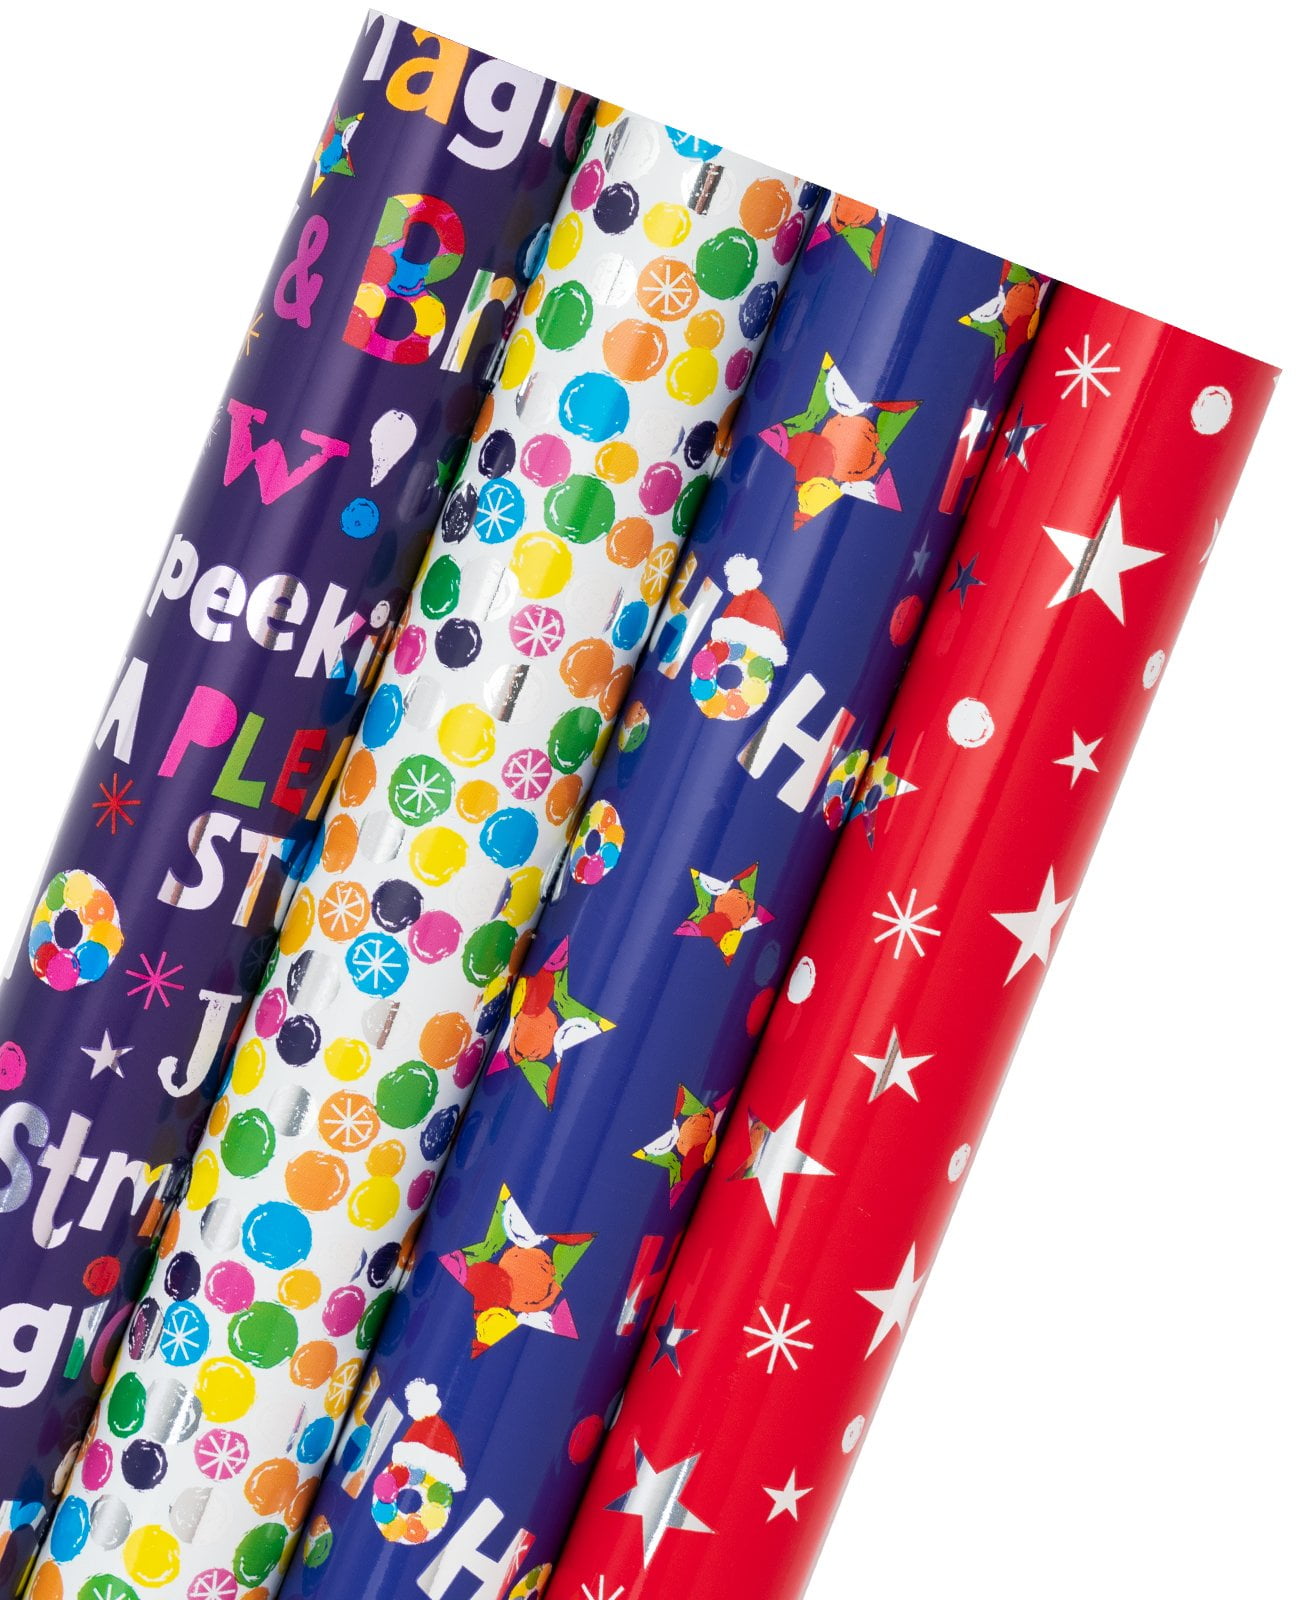 30 x 10' Wrapping Paper